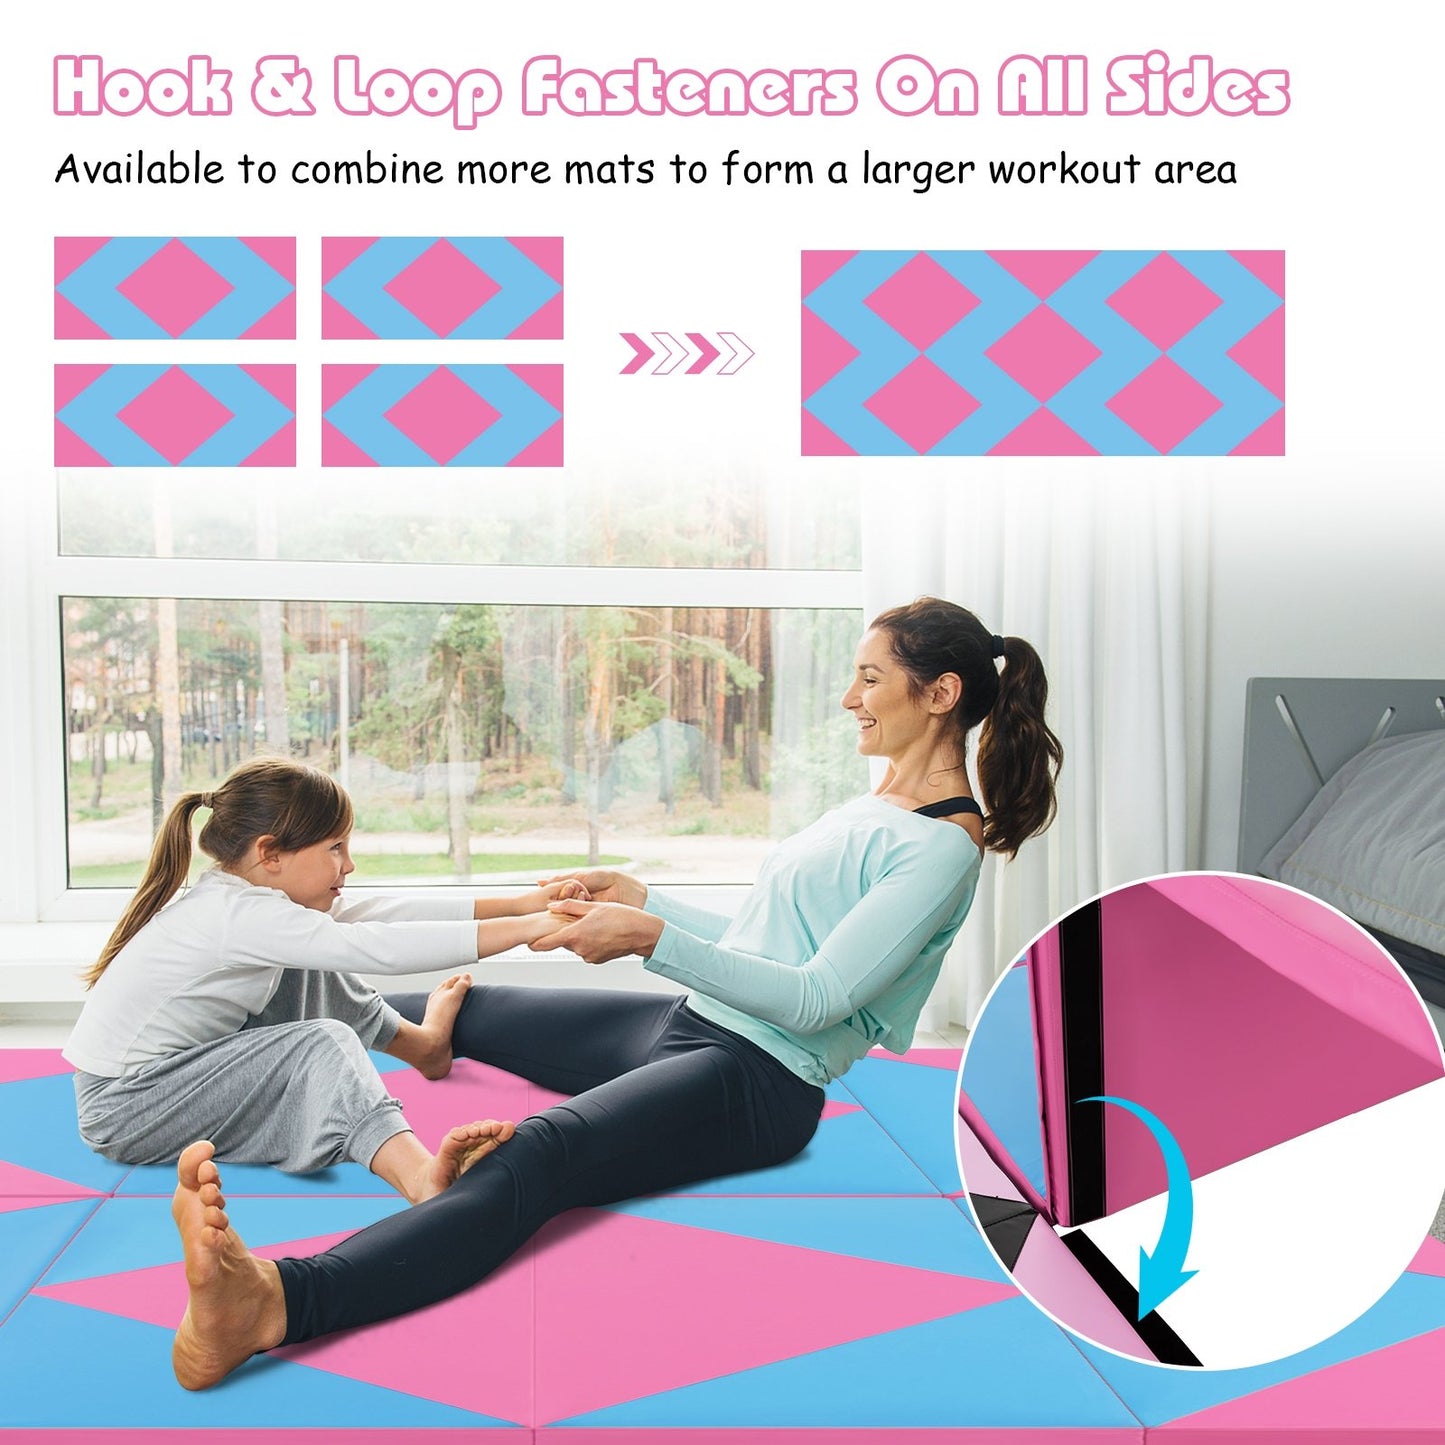 8 Feet PU Leather Folding Gymnastics Mat with Hook and Loop Fasteners, Pink & Blue